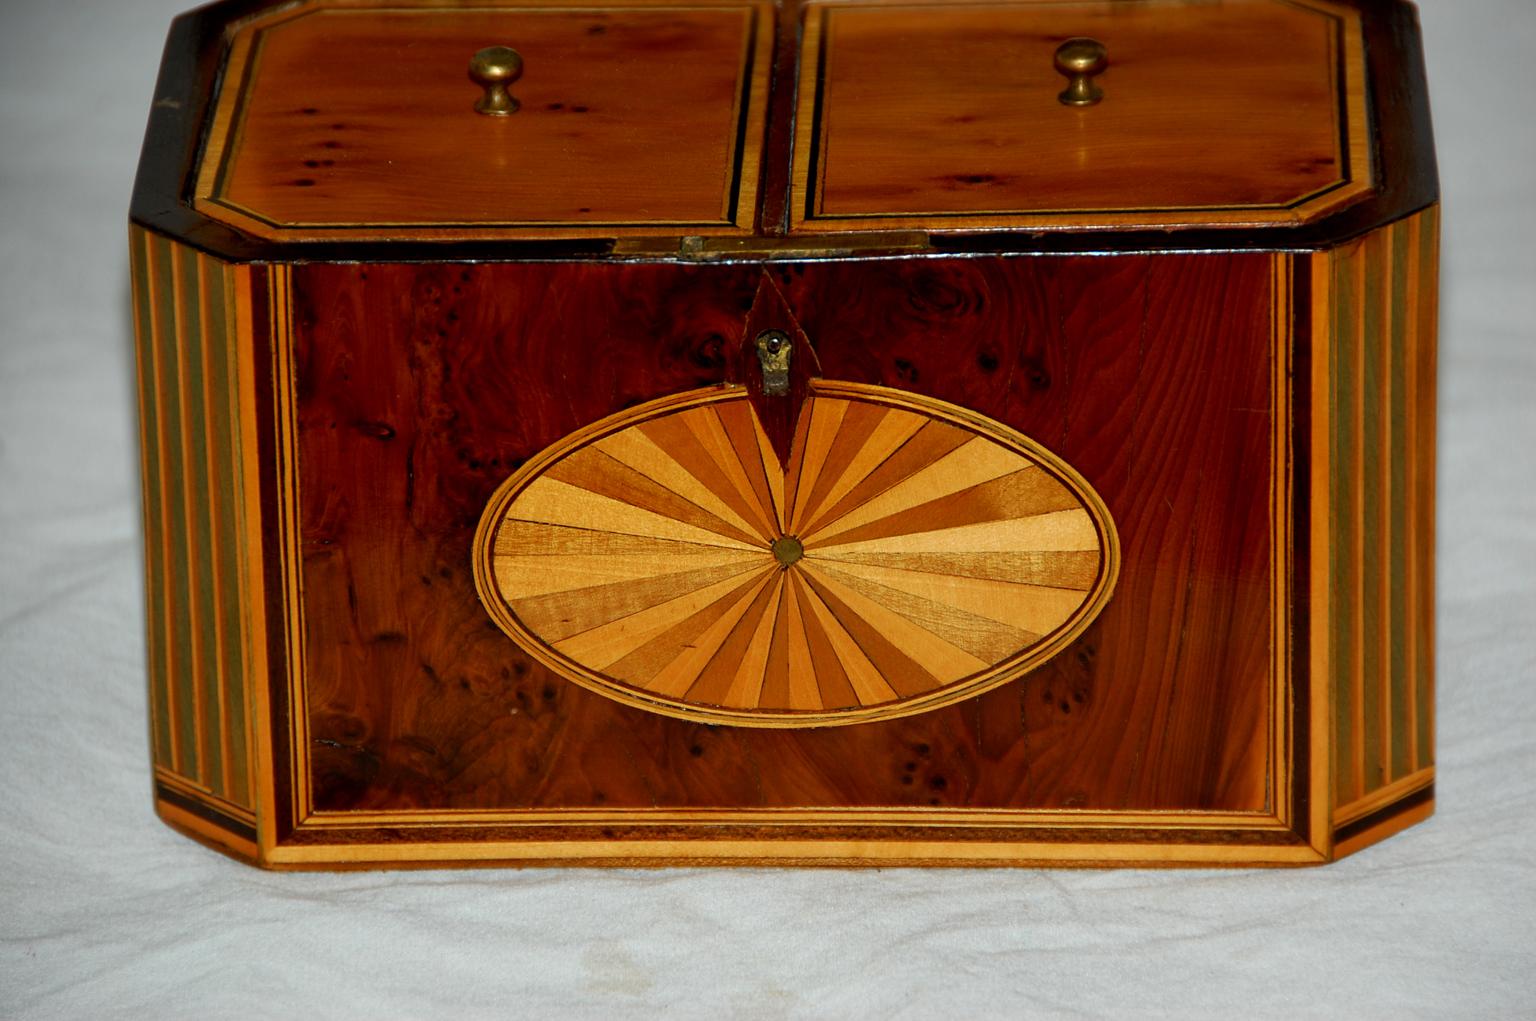 English Georgian Period Yew Wood Octagonal Tea Caddy with Fan and Column Inlays For Sale 2